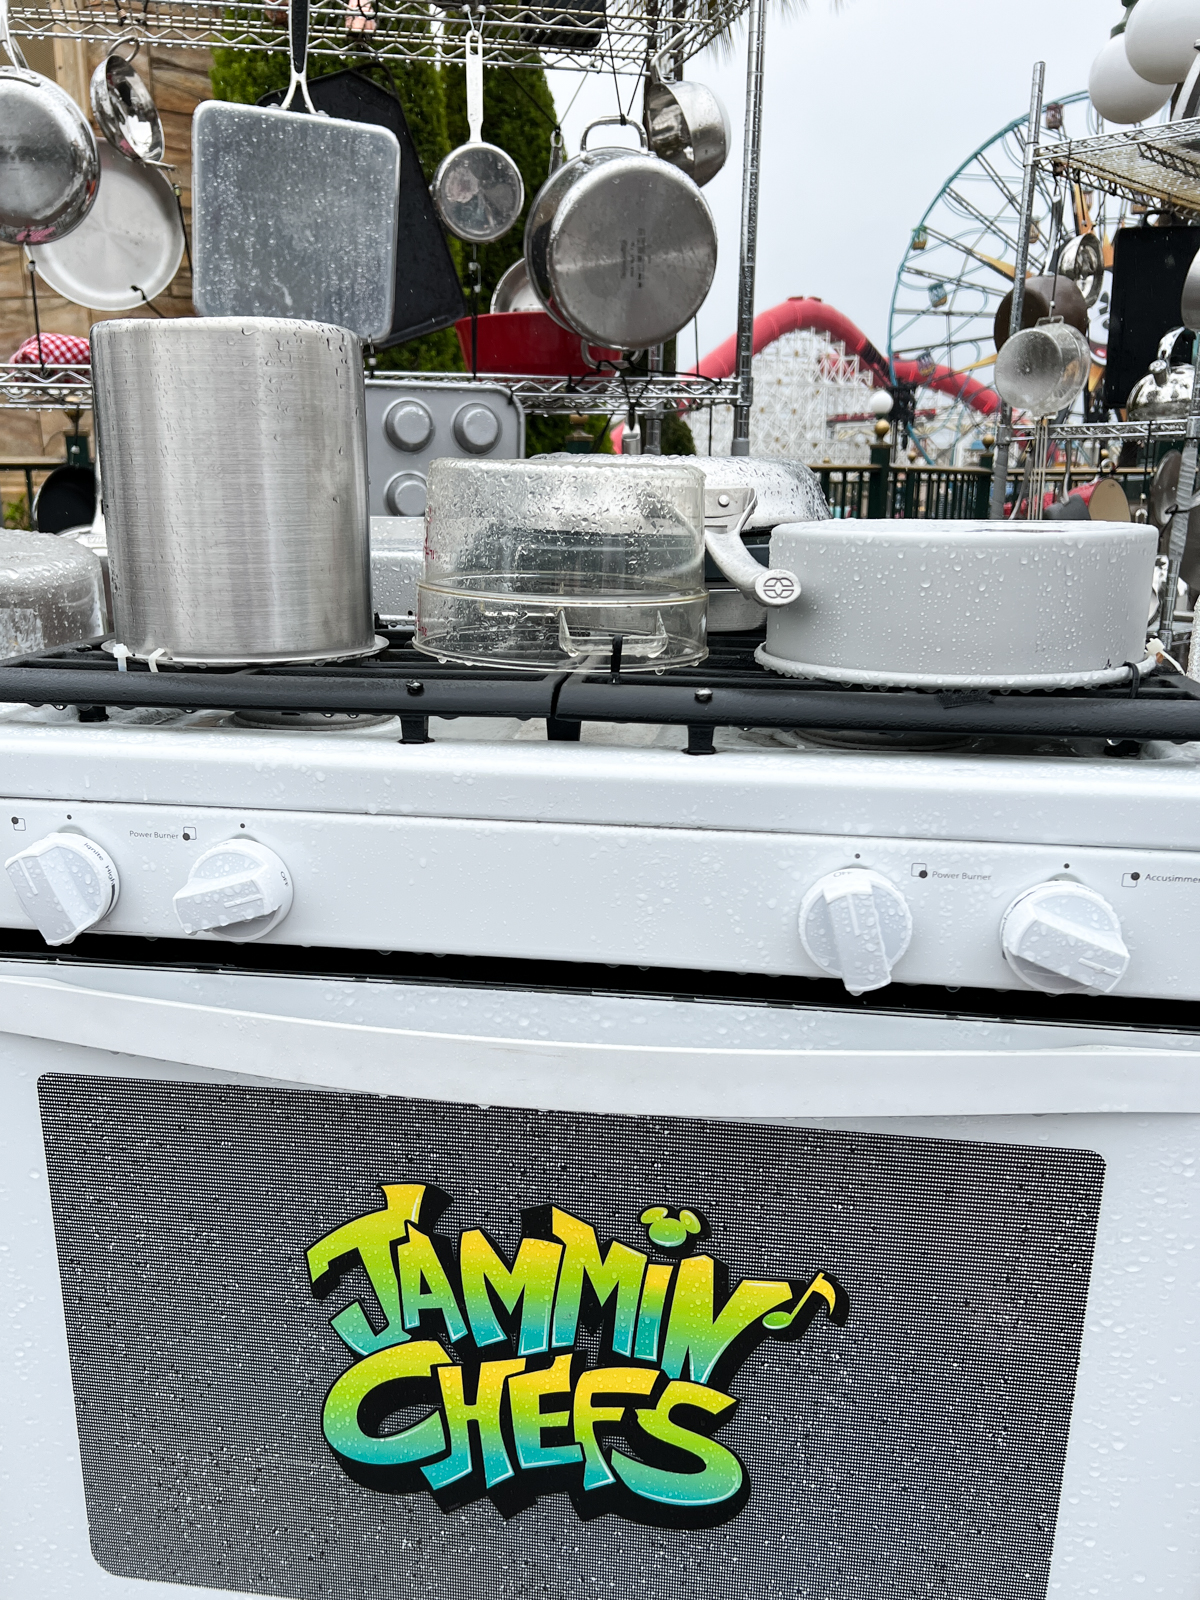 set for the Jammin' Chefs at the Disney California adventure food and wine festival